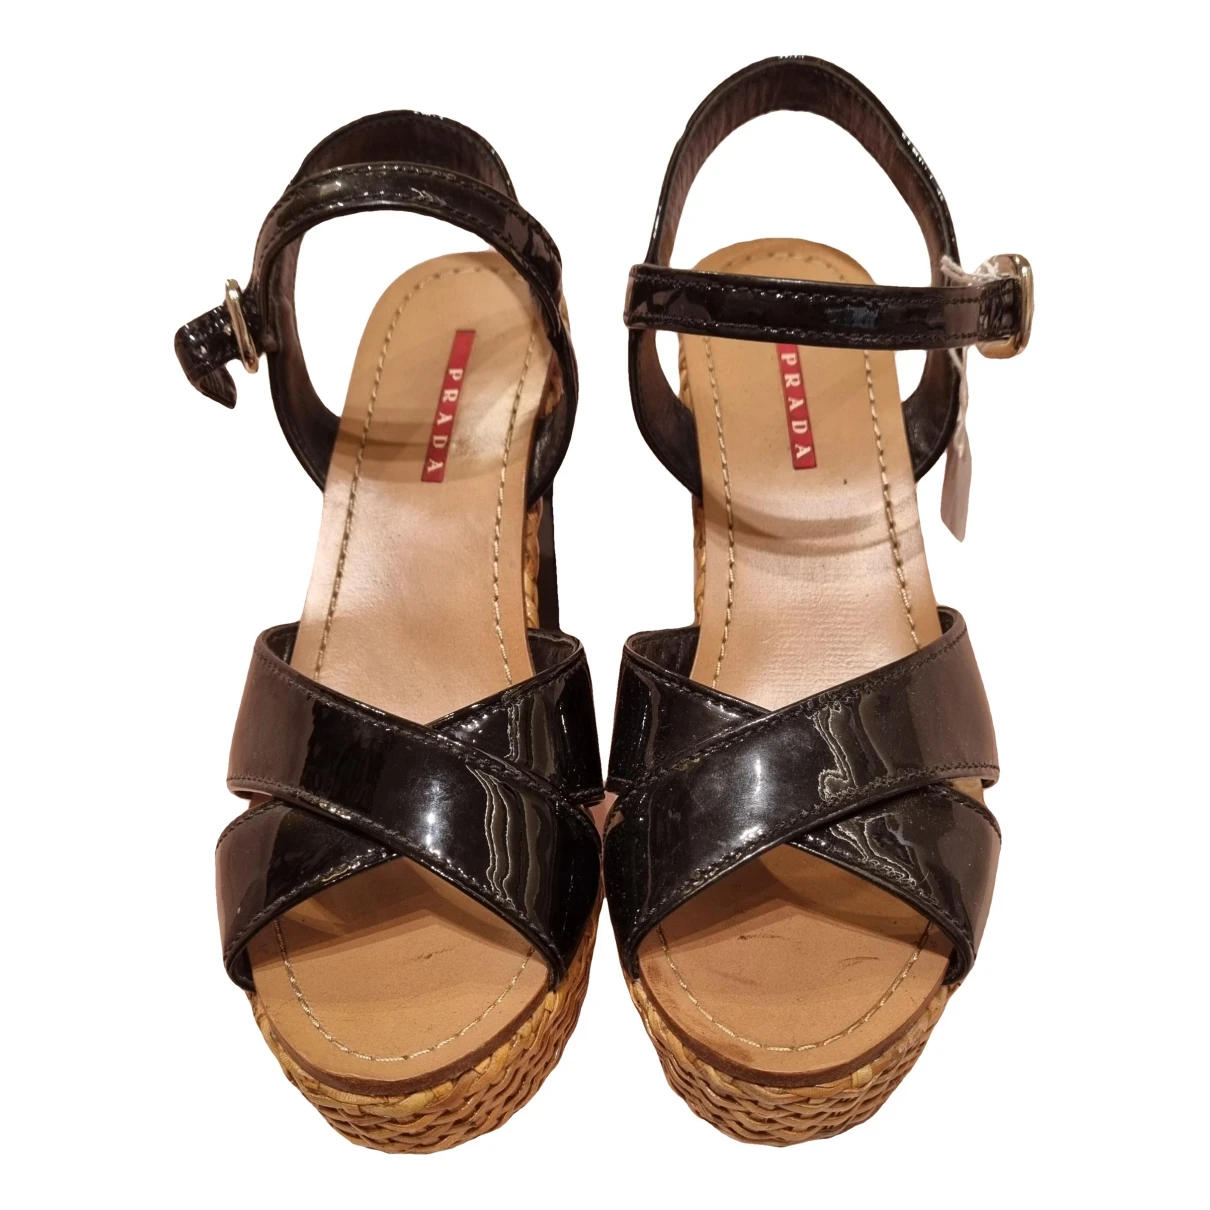 shoes Prada sandals for Female Patent leather 37.5 EU. Used condition